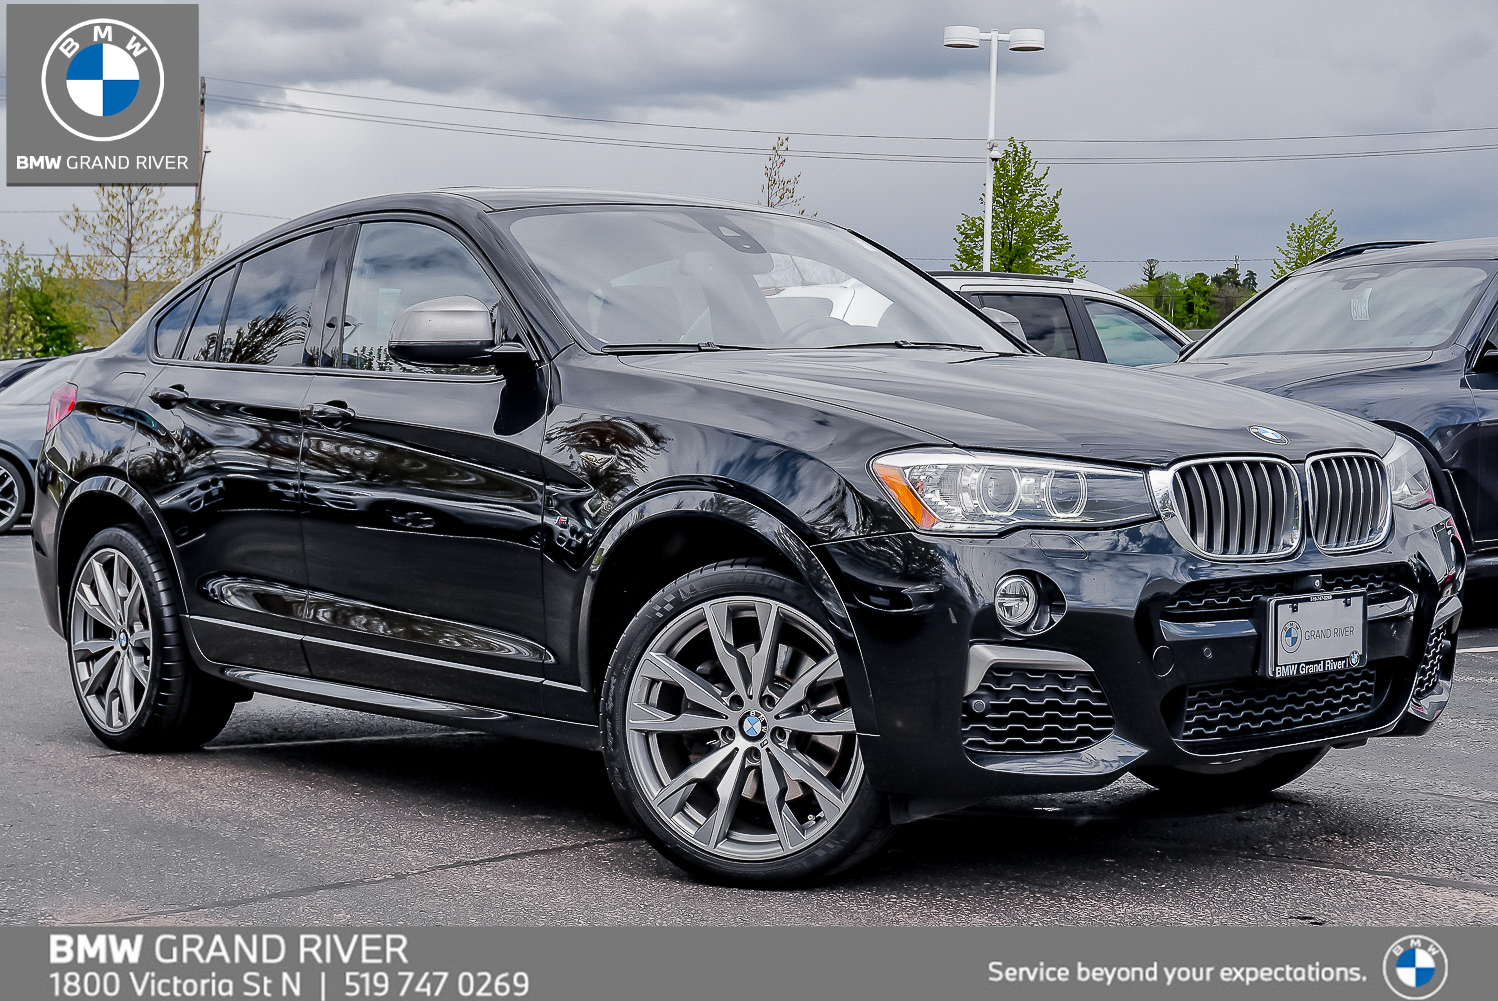 2017 BMW X4 JUST ARRIVED | PICTURES TO COME SOON |